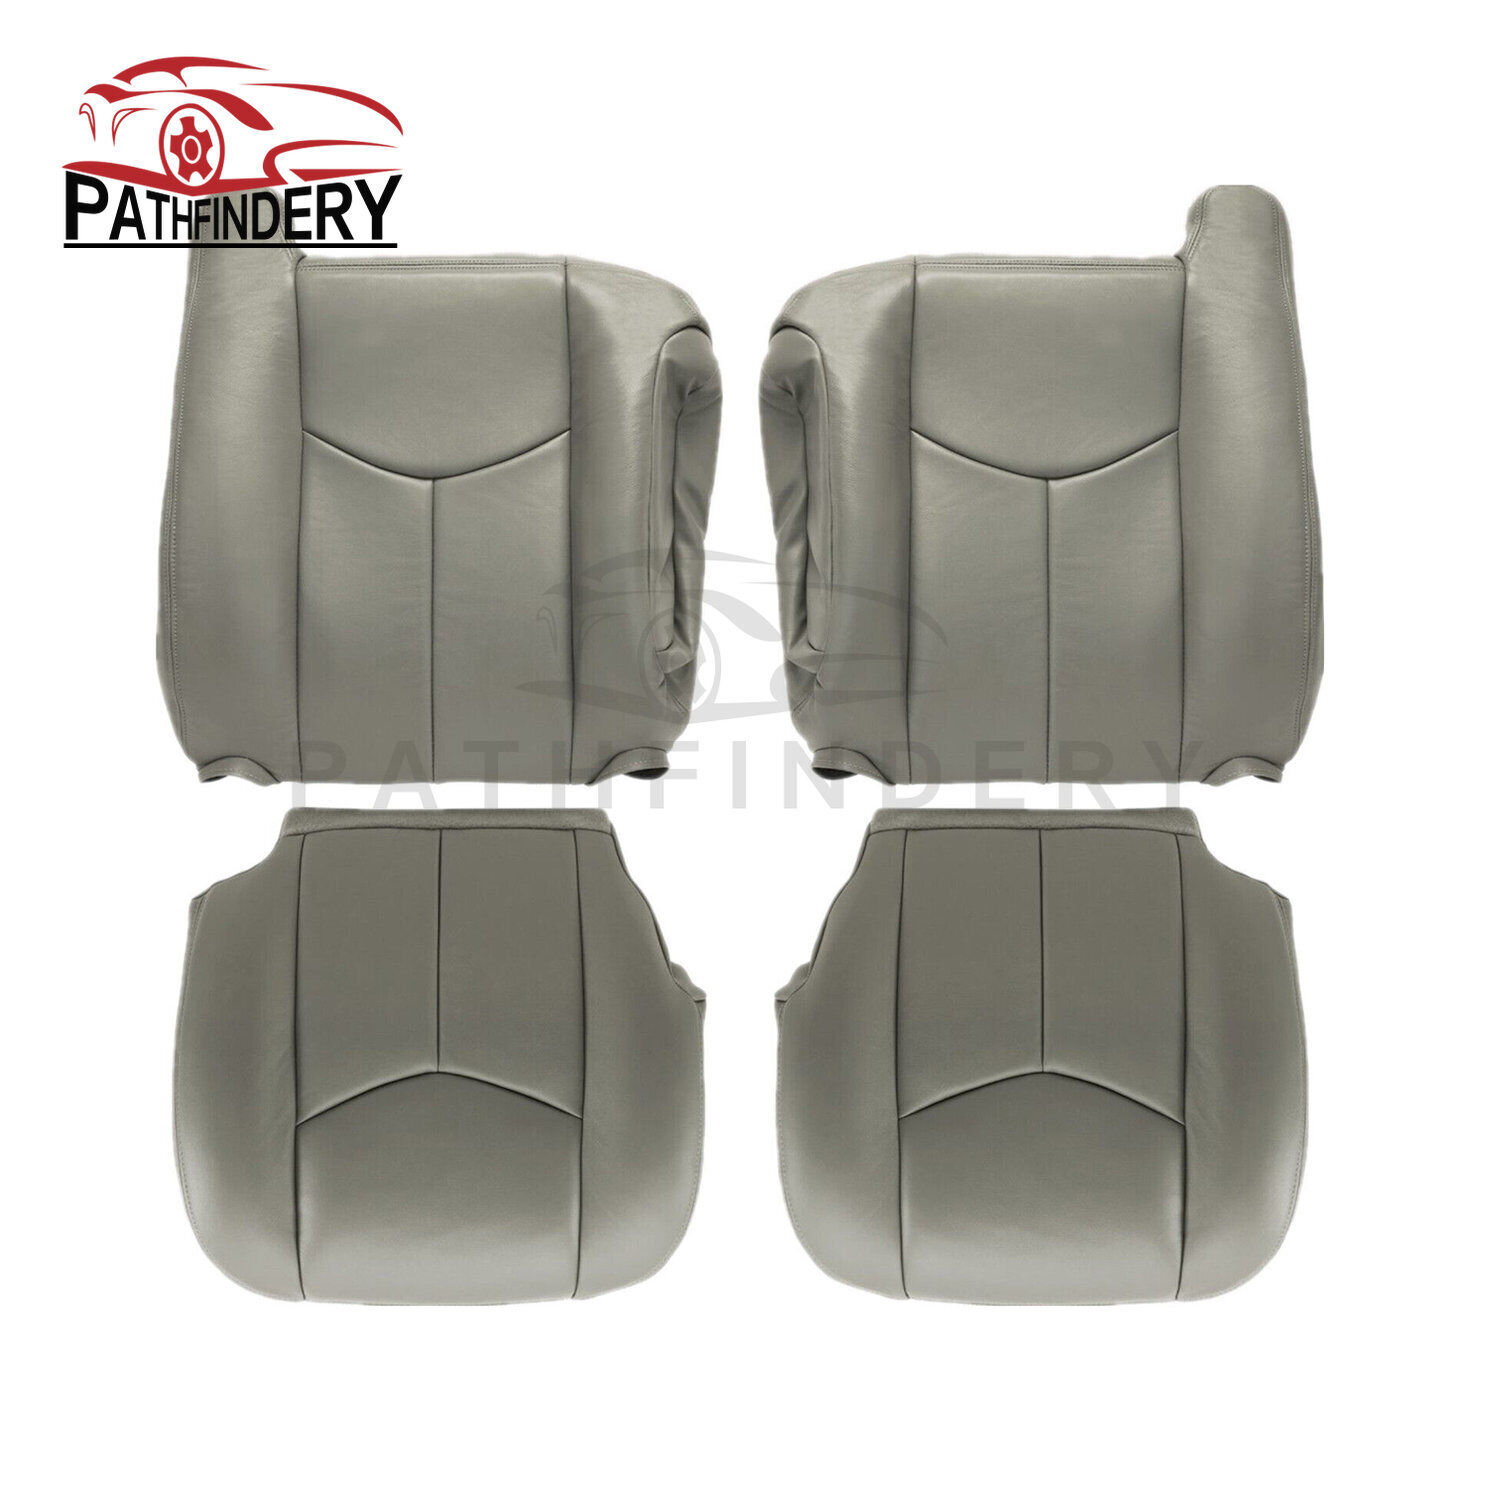 Front Leather Seat Cover Gray For 2003 2004 2005-2007 Chevy Silverado GMC Sierra